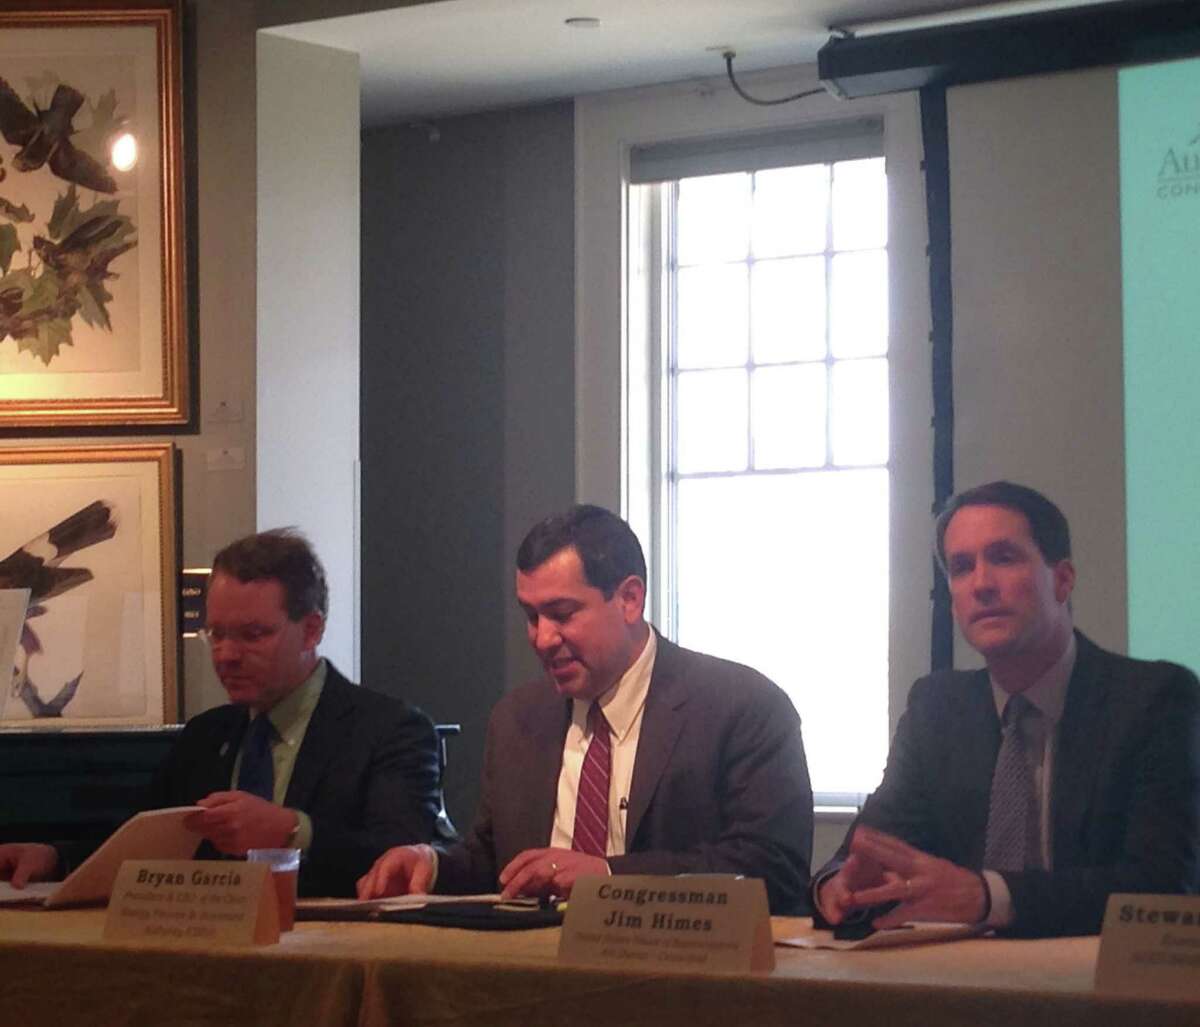 From left: Connecticut Green Building Council board member Mark Robbins, Clean Energy Finance and Investment Authority president Bryan Garcia and U.S. Rep Jim Himes discuss environmental issues during an Earth Day program at Greenwichís Audobon Center Tuesday.